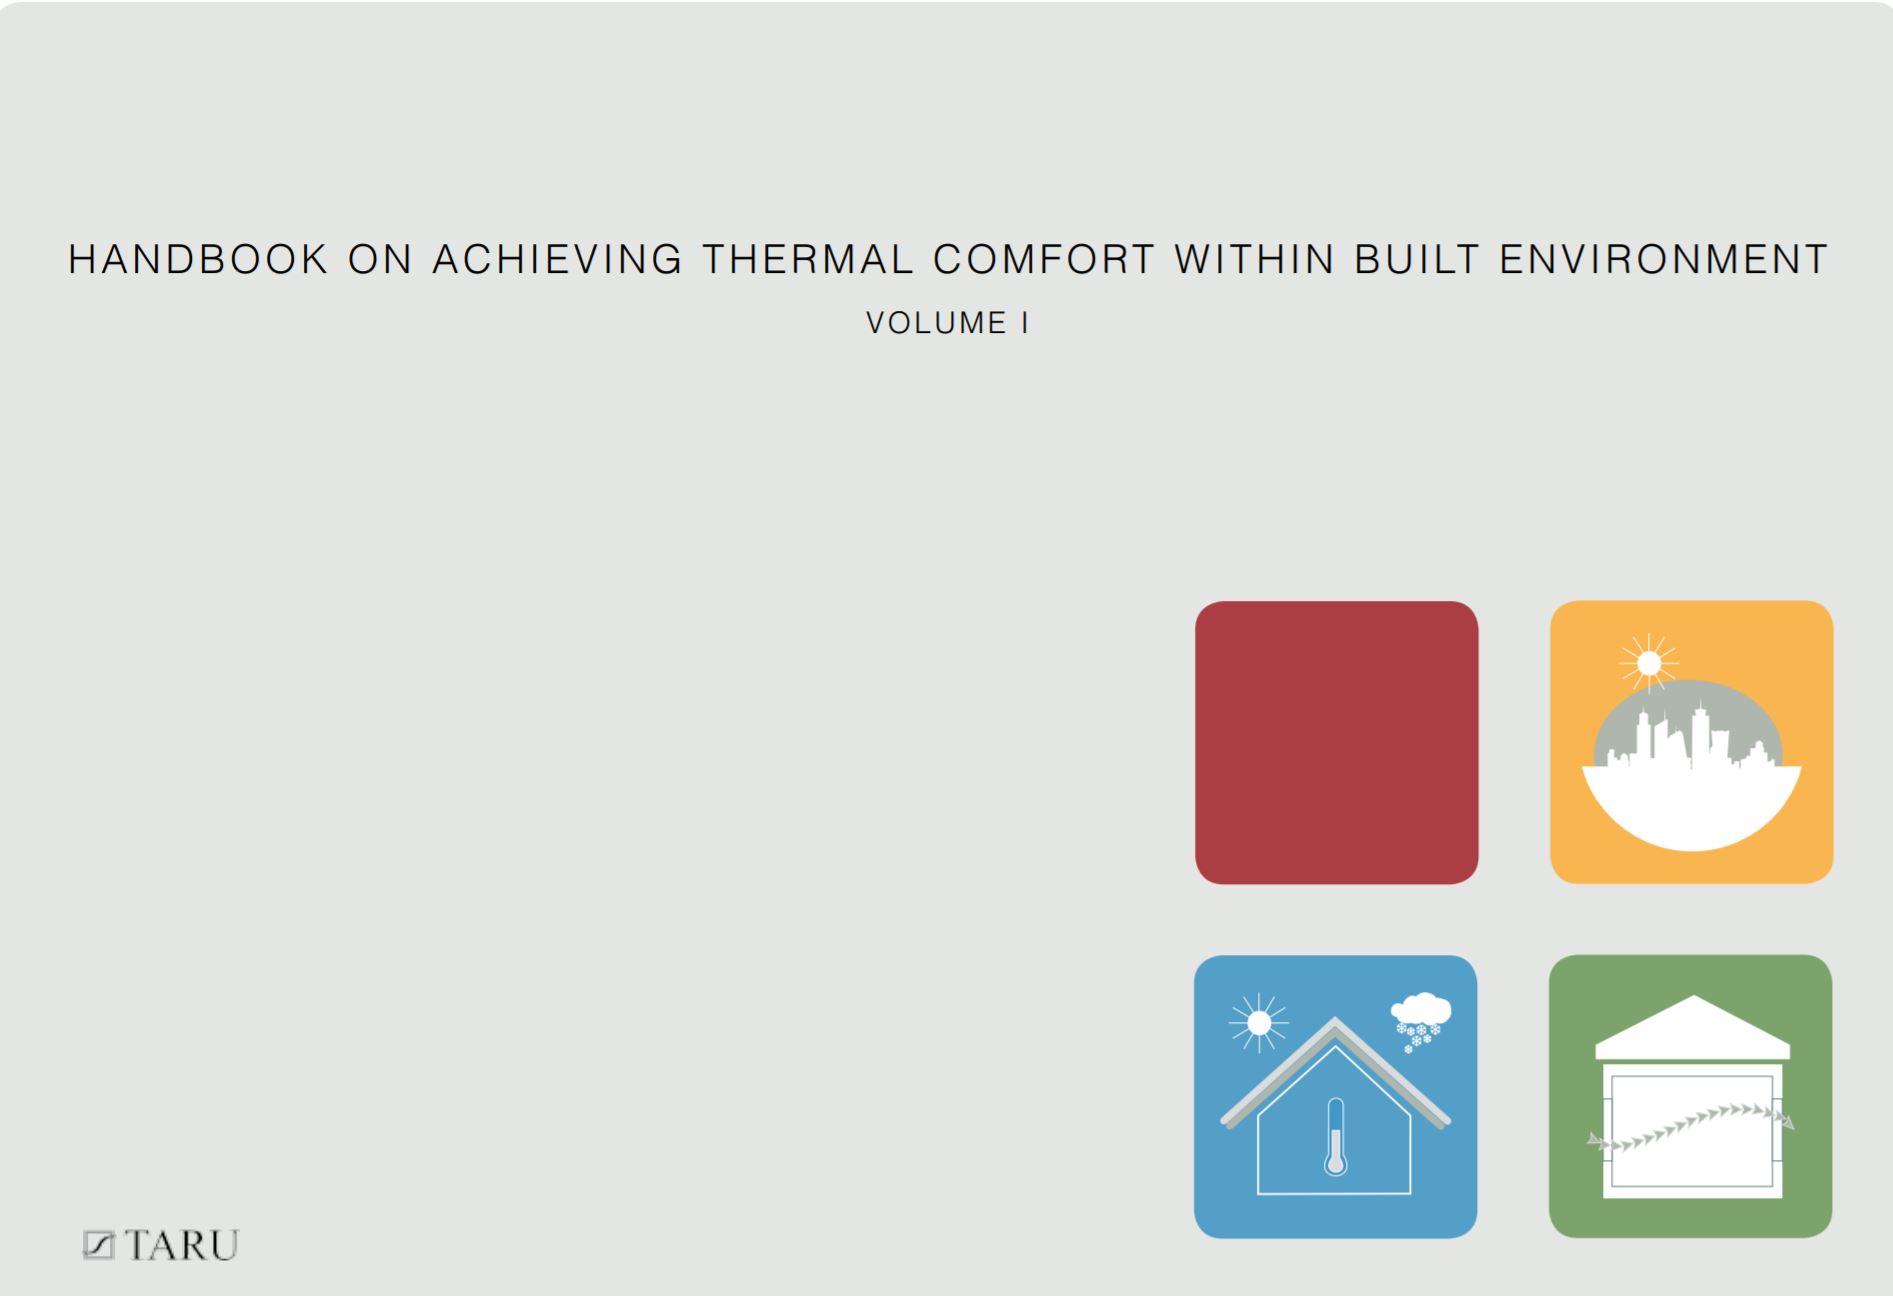 Handbook on Achieving Thermal Comfort Within Built Environment: Volume 1